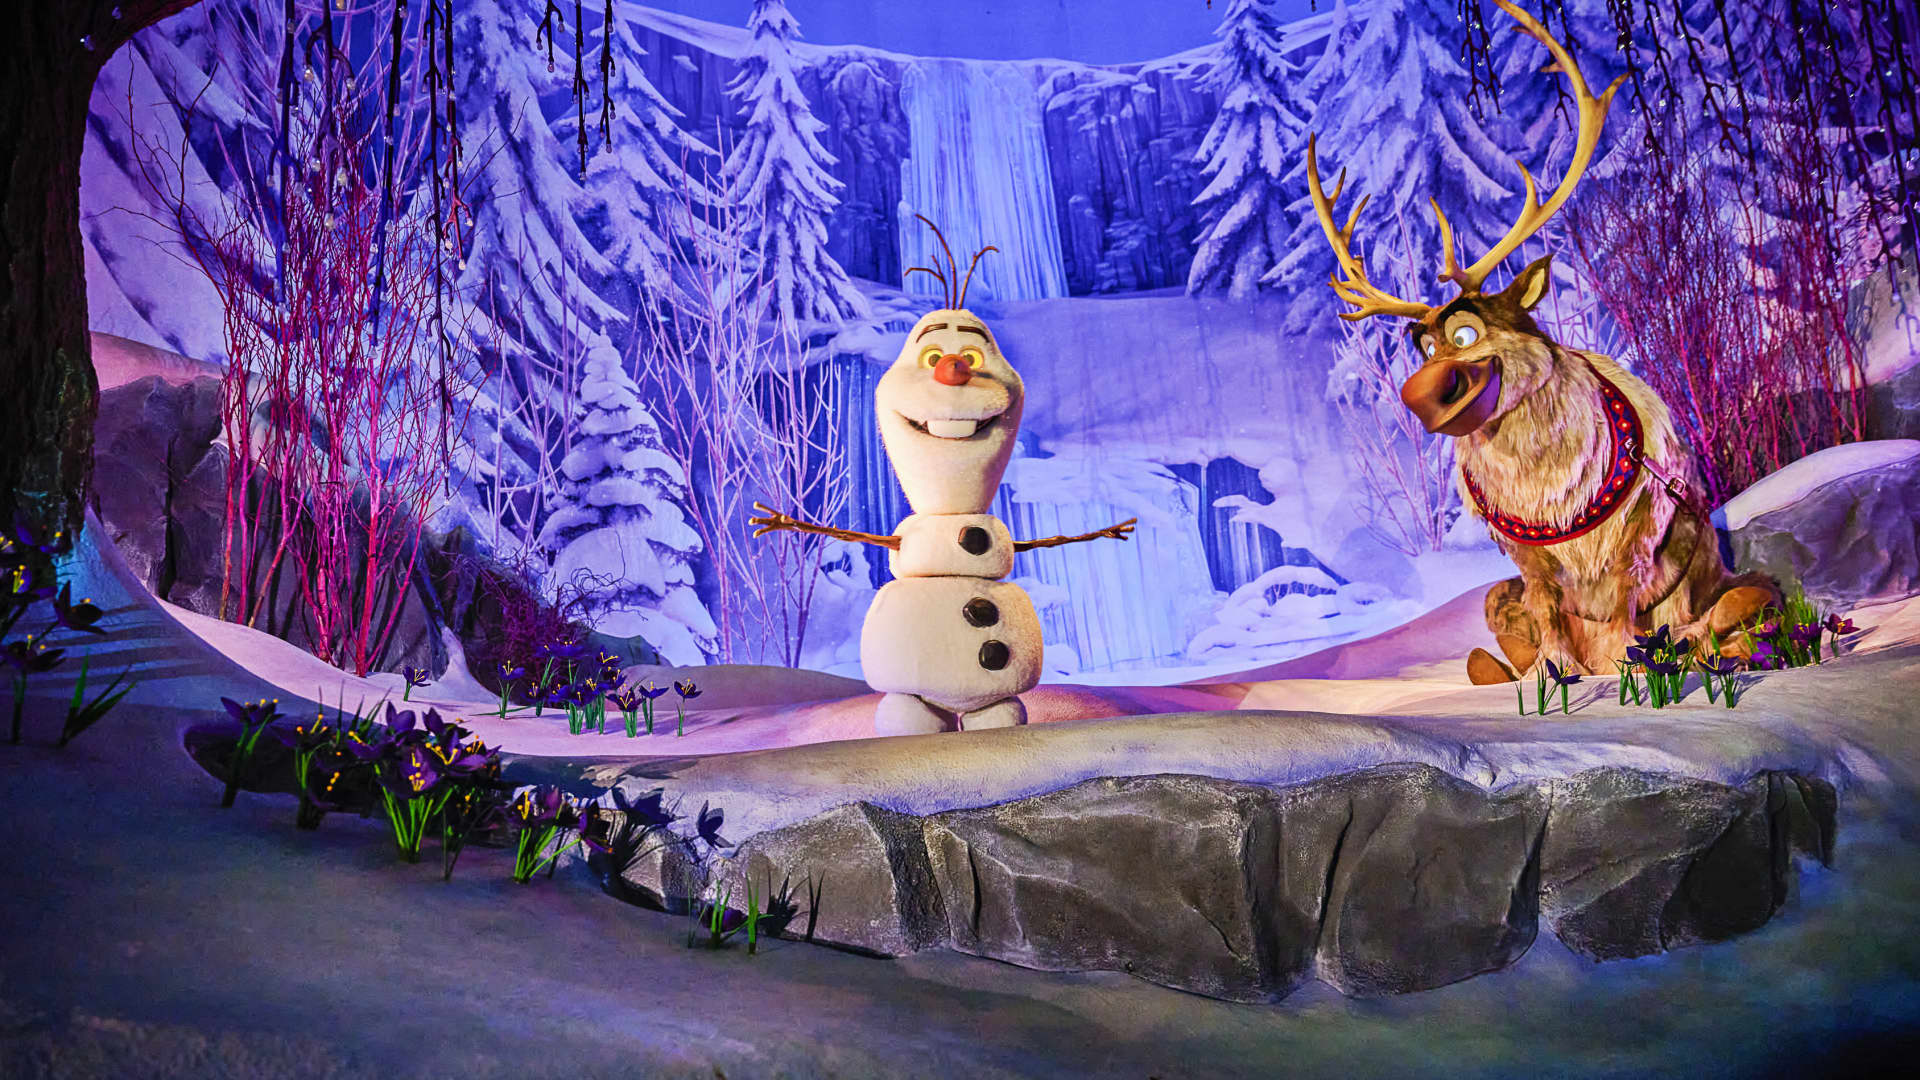 Two Audio-Animatronic figures of Disney's Olaf and Sven in the 